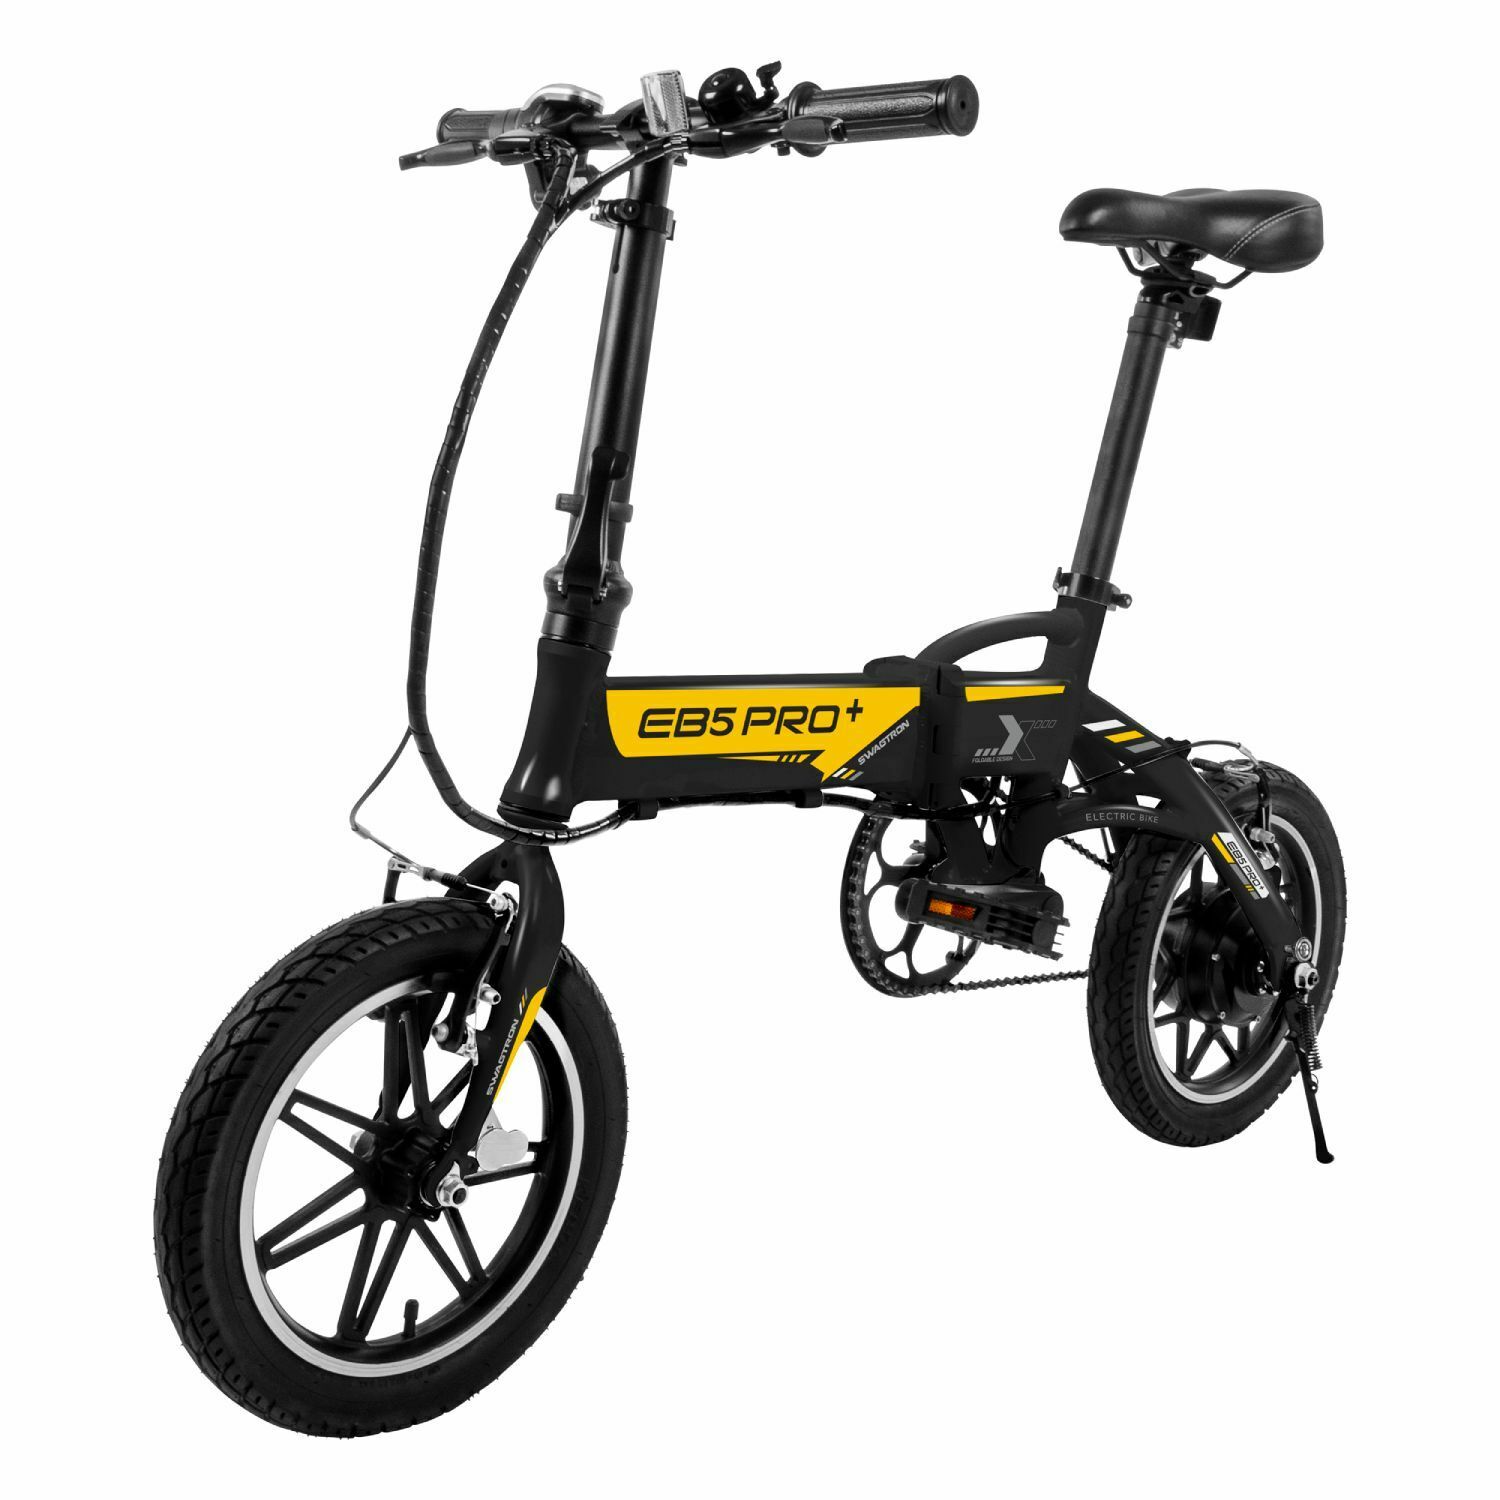 Swagtron Lightweight Folding Electric Bike Removable Battery & Pedals EB5 PRO